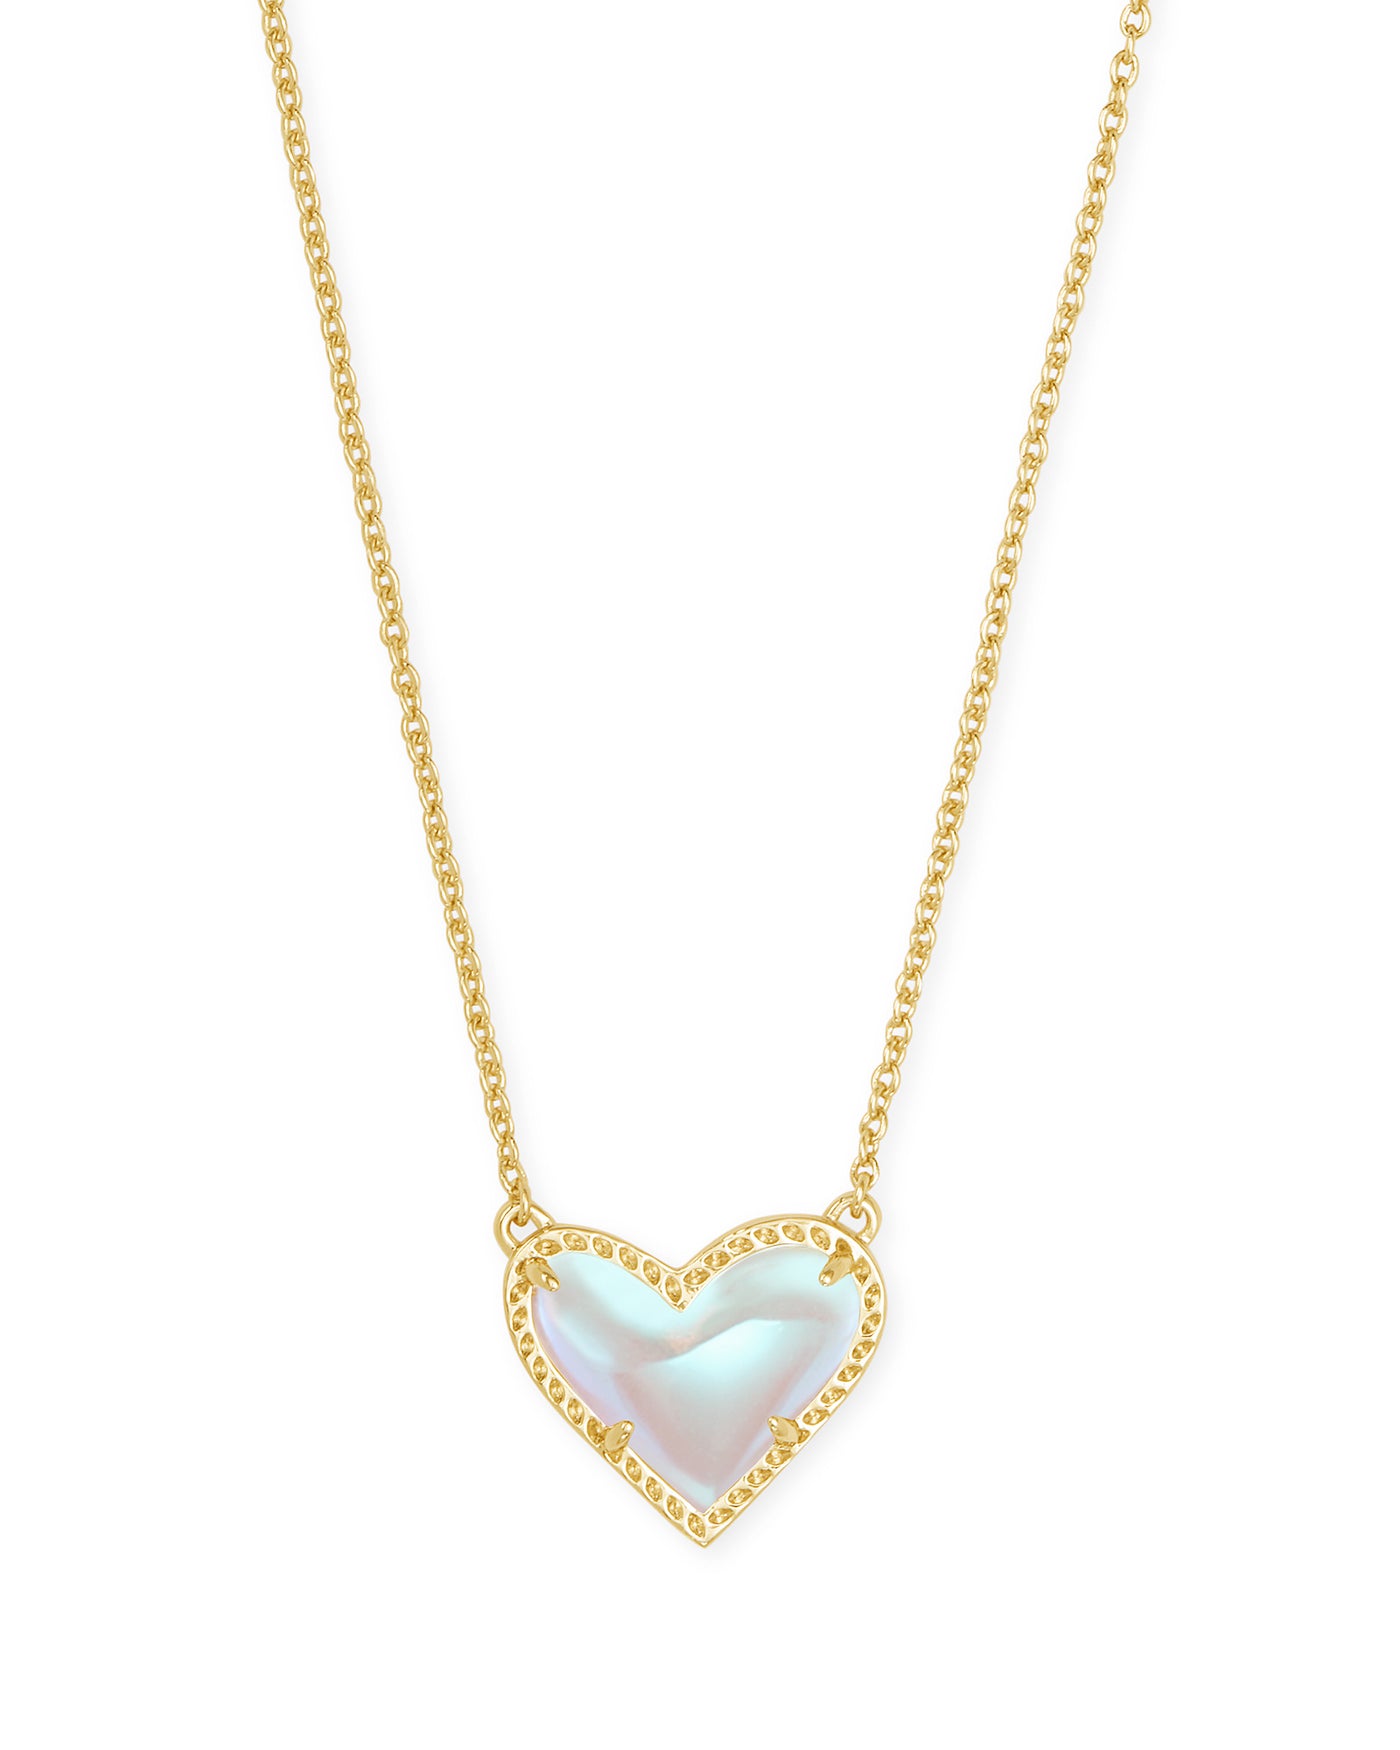 Kendra Scott Ari Heart Short Pendant Necklace Gold Dichroic Glass-Necklaces-Kendra Scott-Market Street Nest, Fashionable Clothing, Shoes and Home Décor Located in Mabank, TX